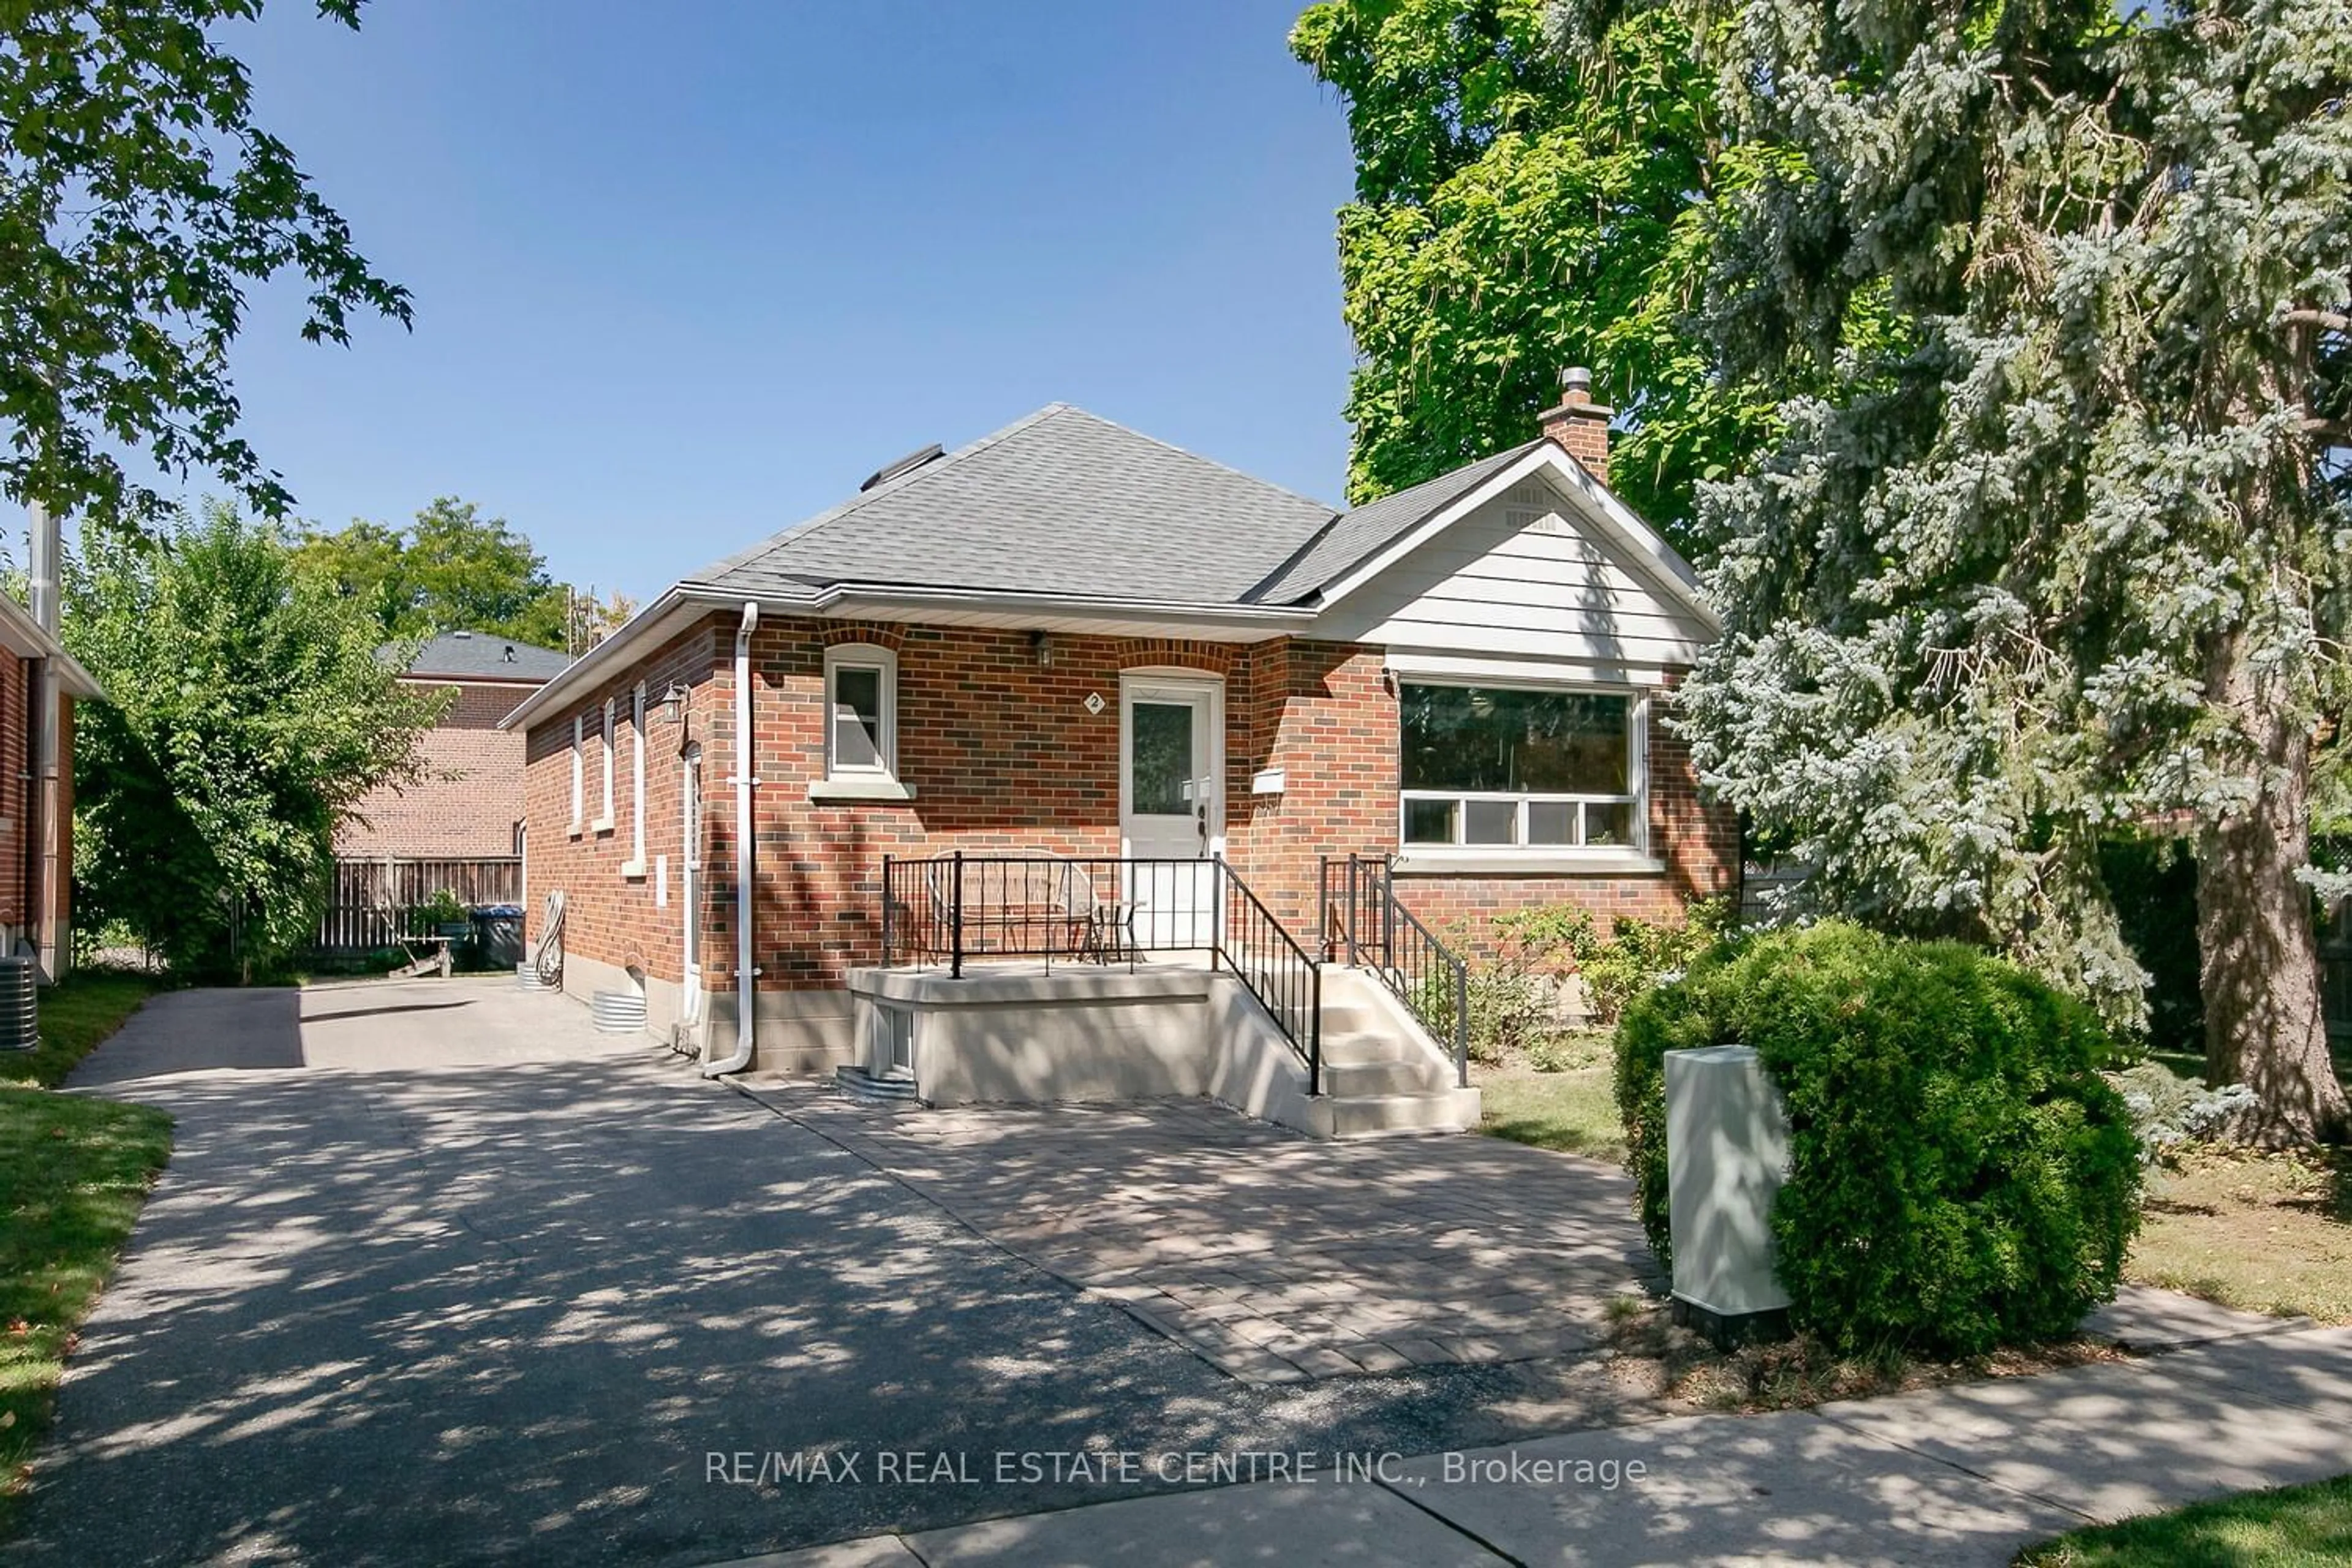 Home with brick exterior material for 2 Gregory St, Brampton Ontario L6Y 1G1